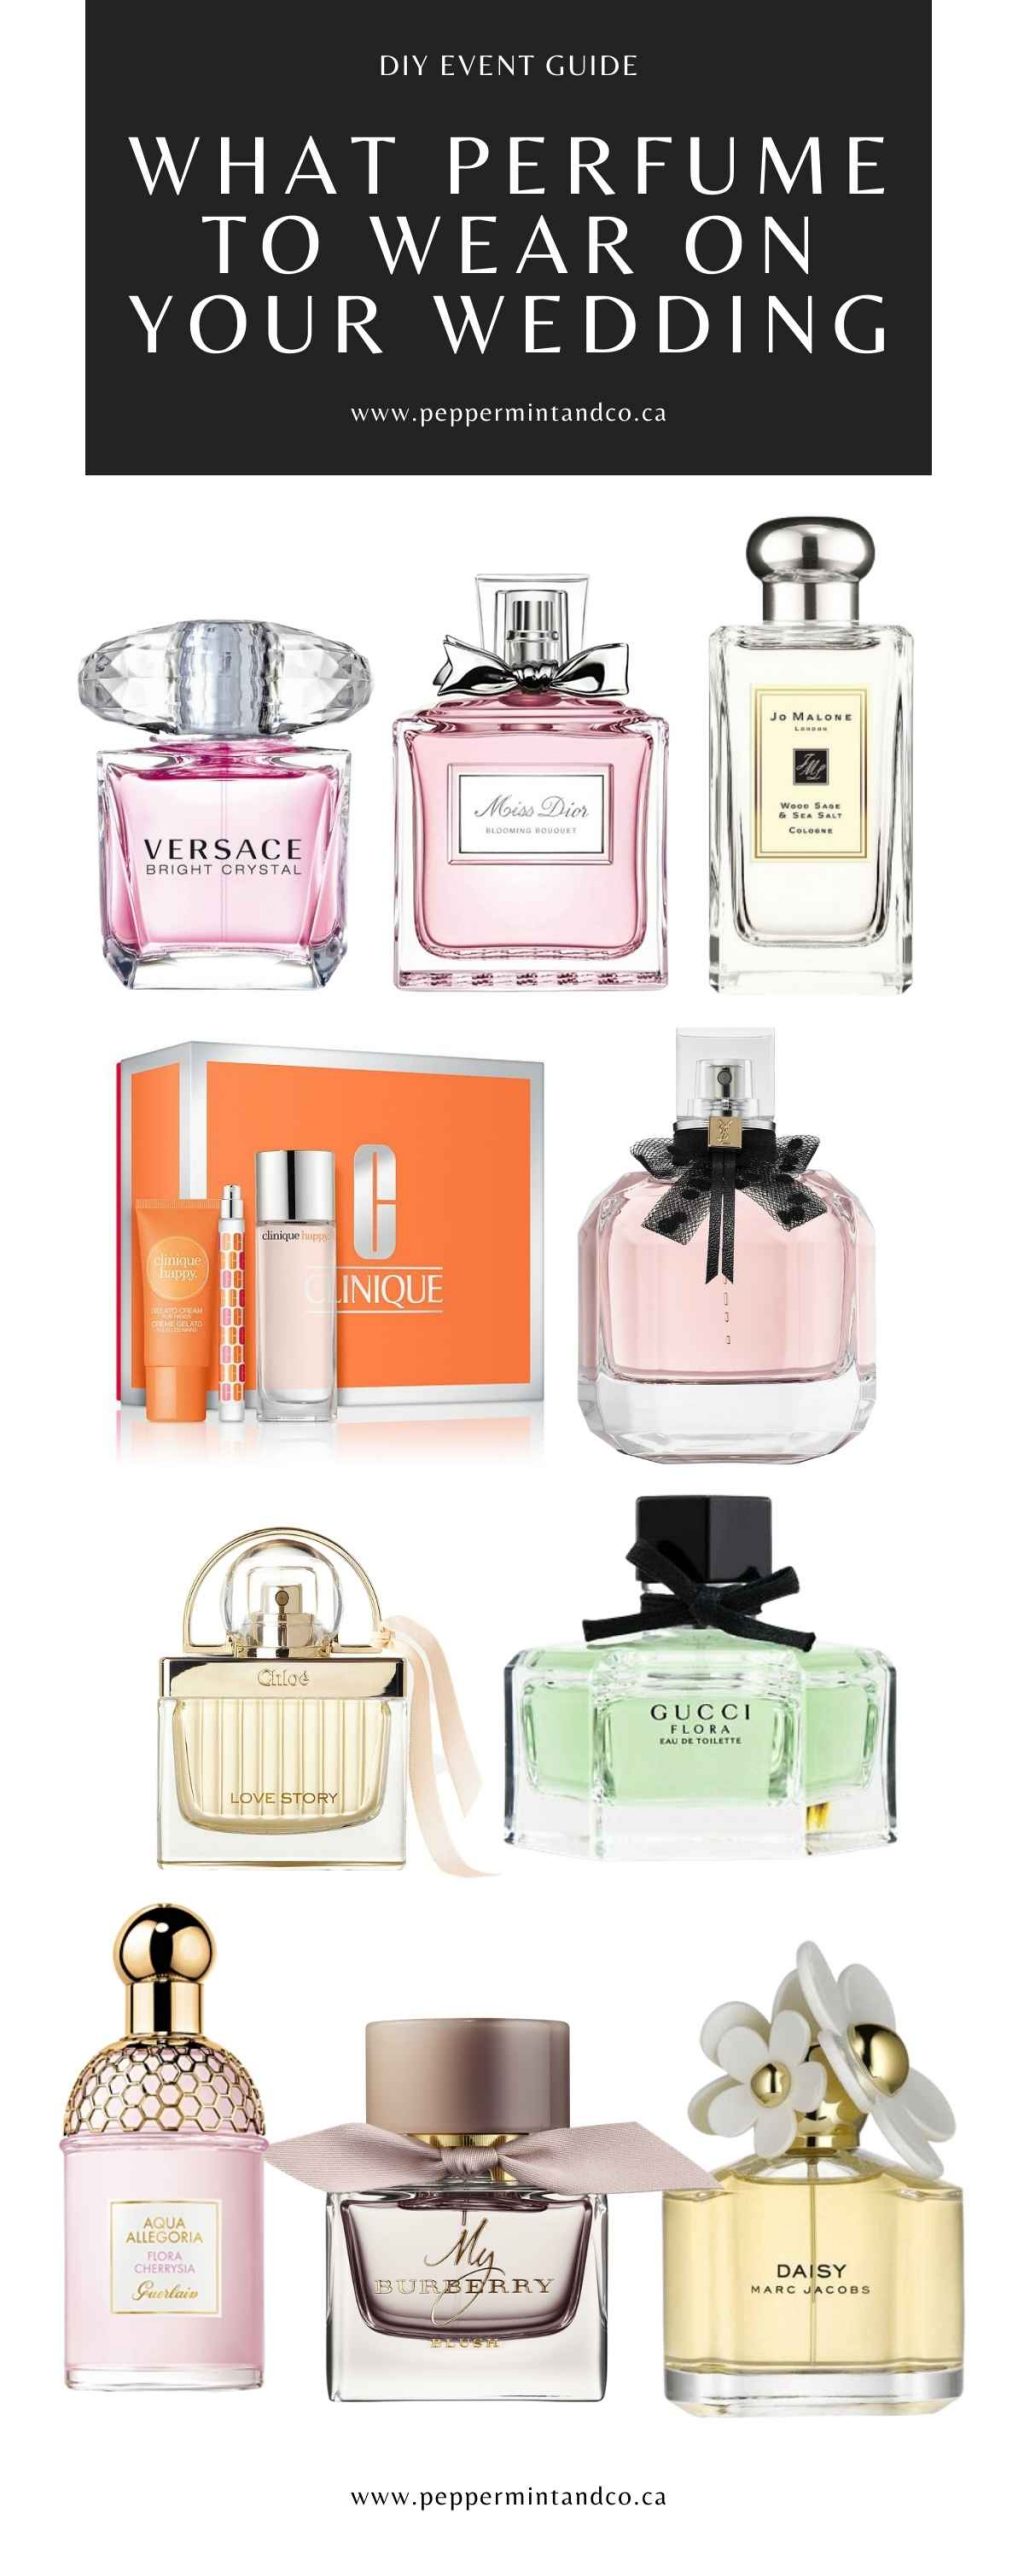 what perfume to wear on your wedding day, gucci, clinique, chloe, ysl, dior, versace, jo malone